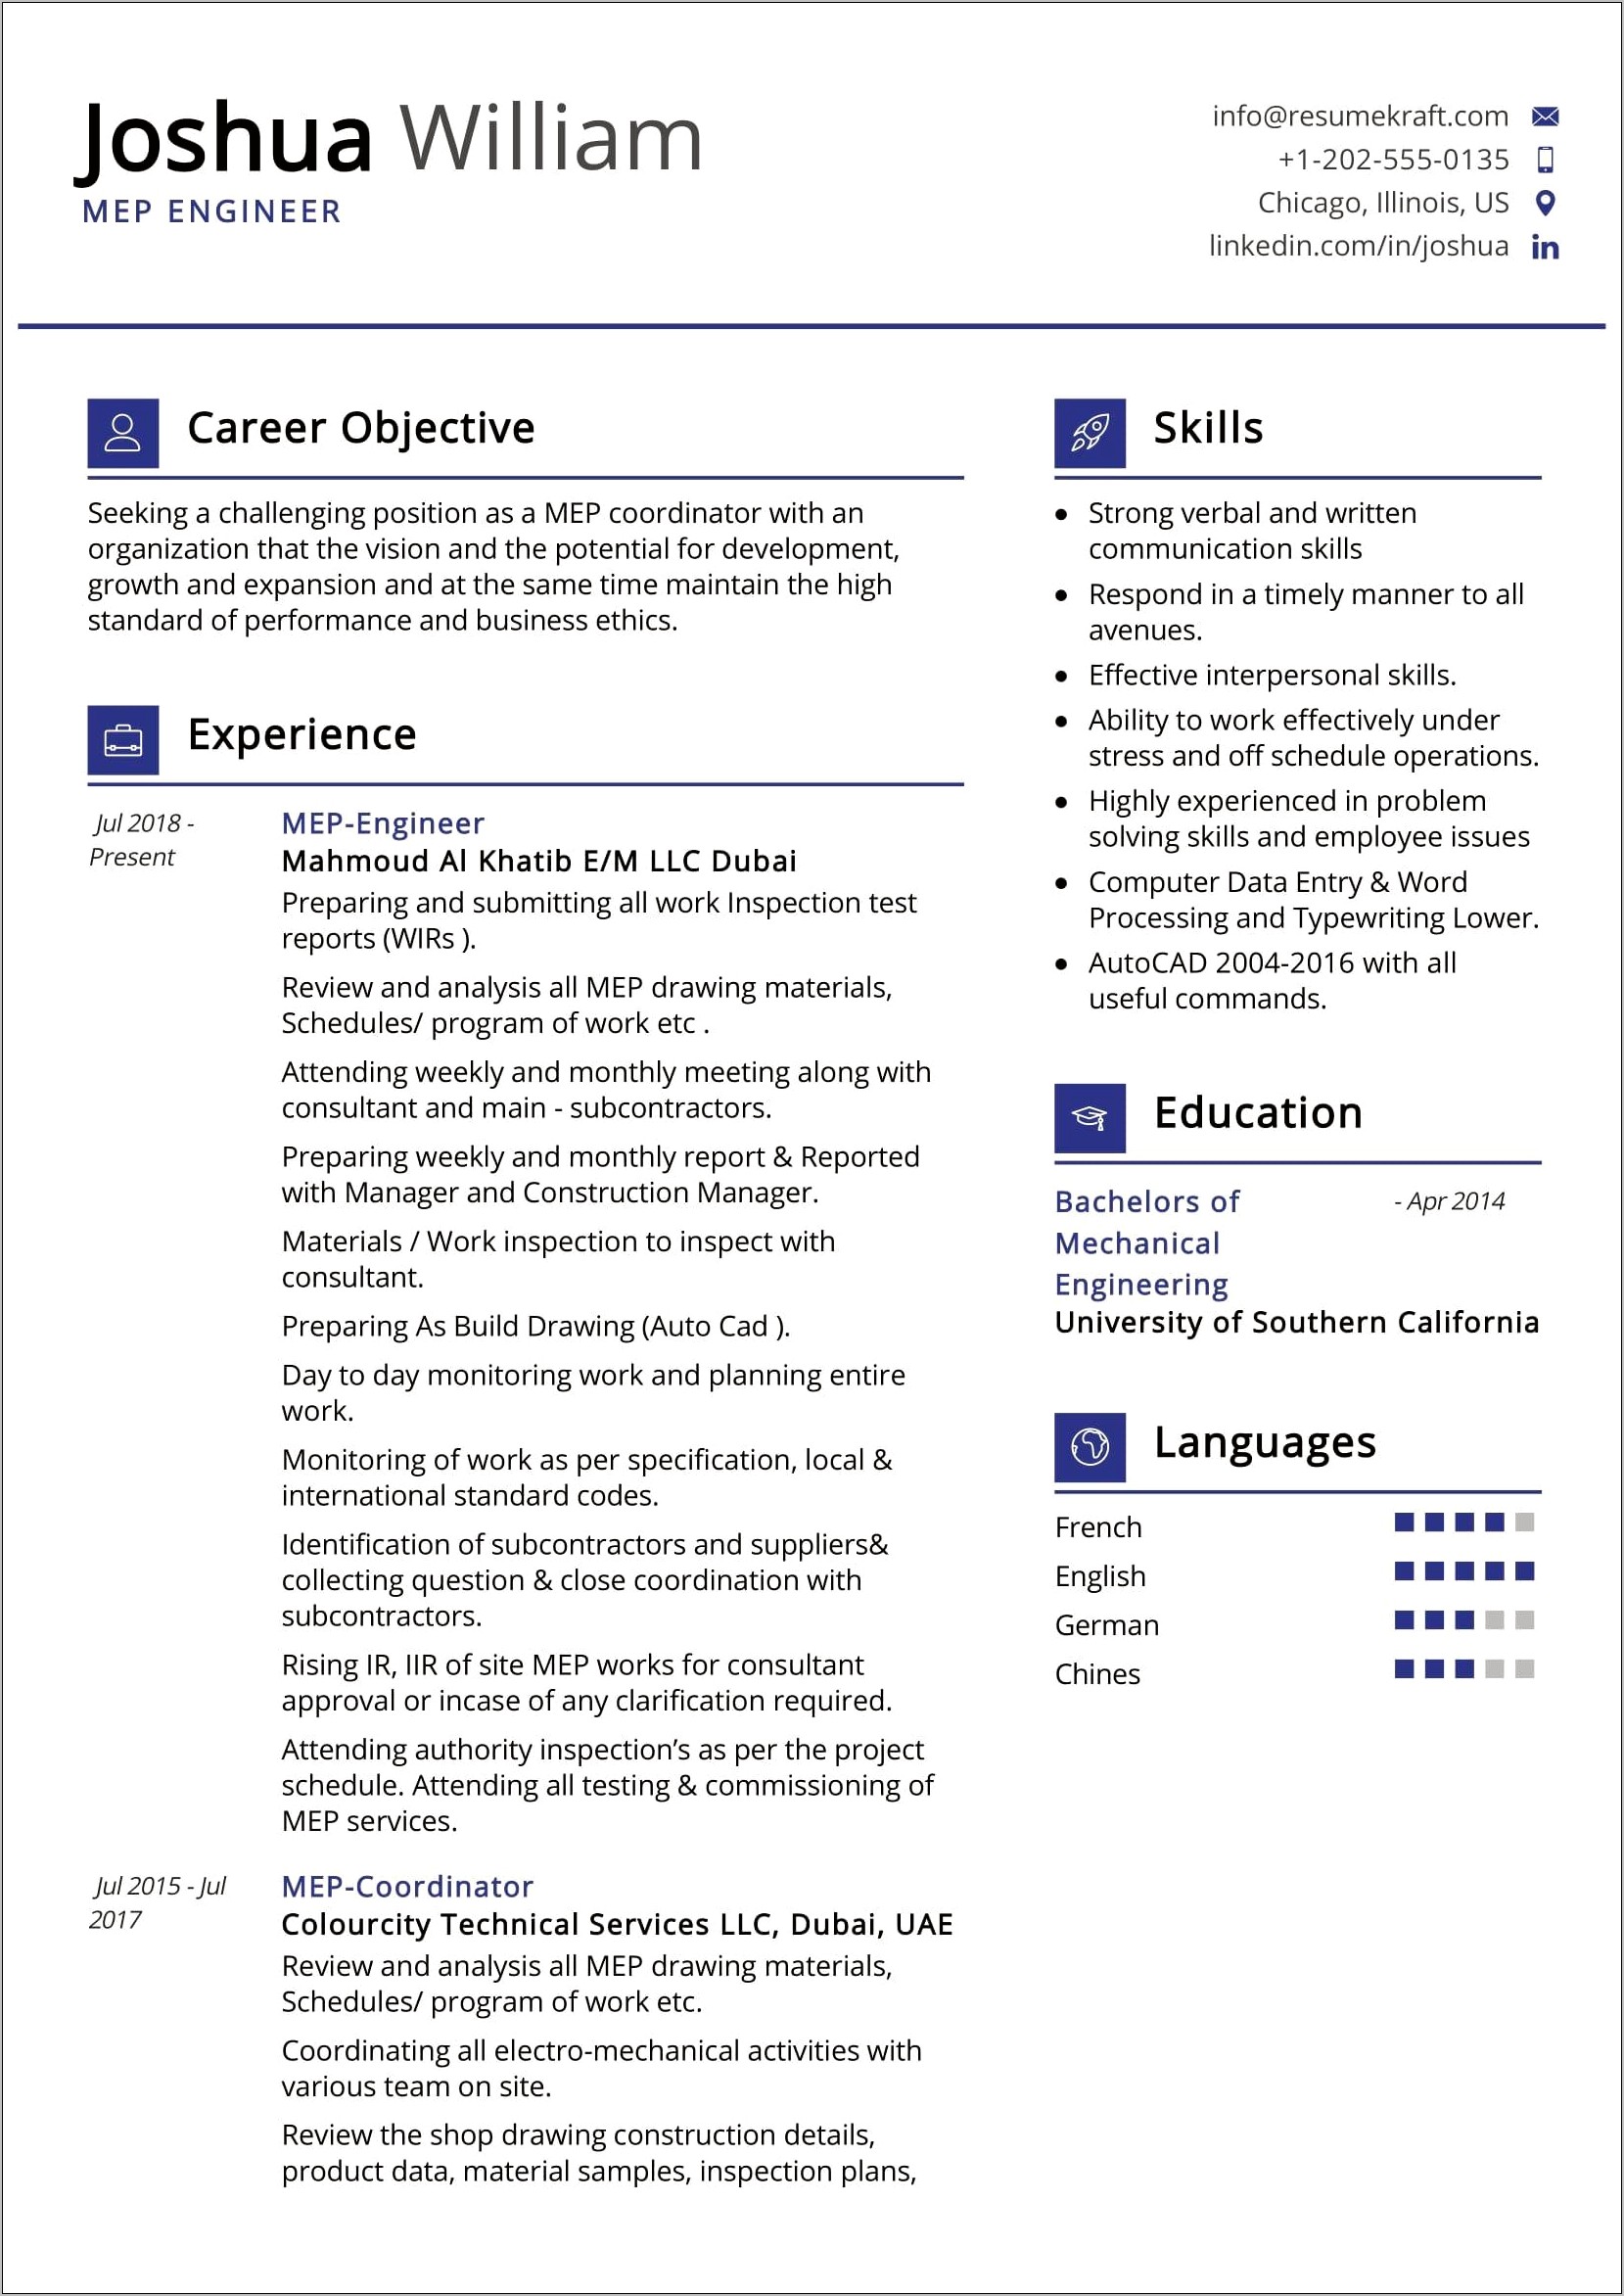 Career Objectives In Resume For Engineers